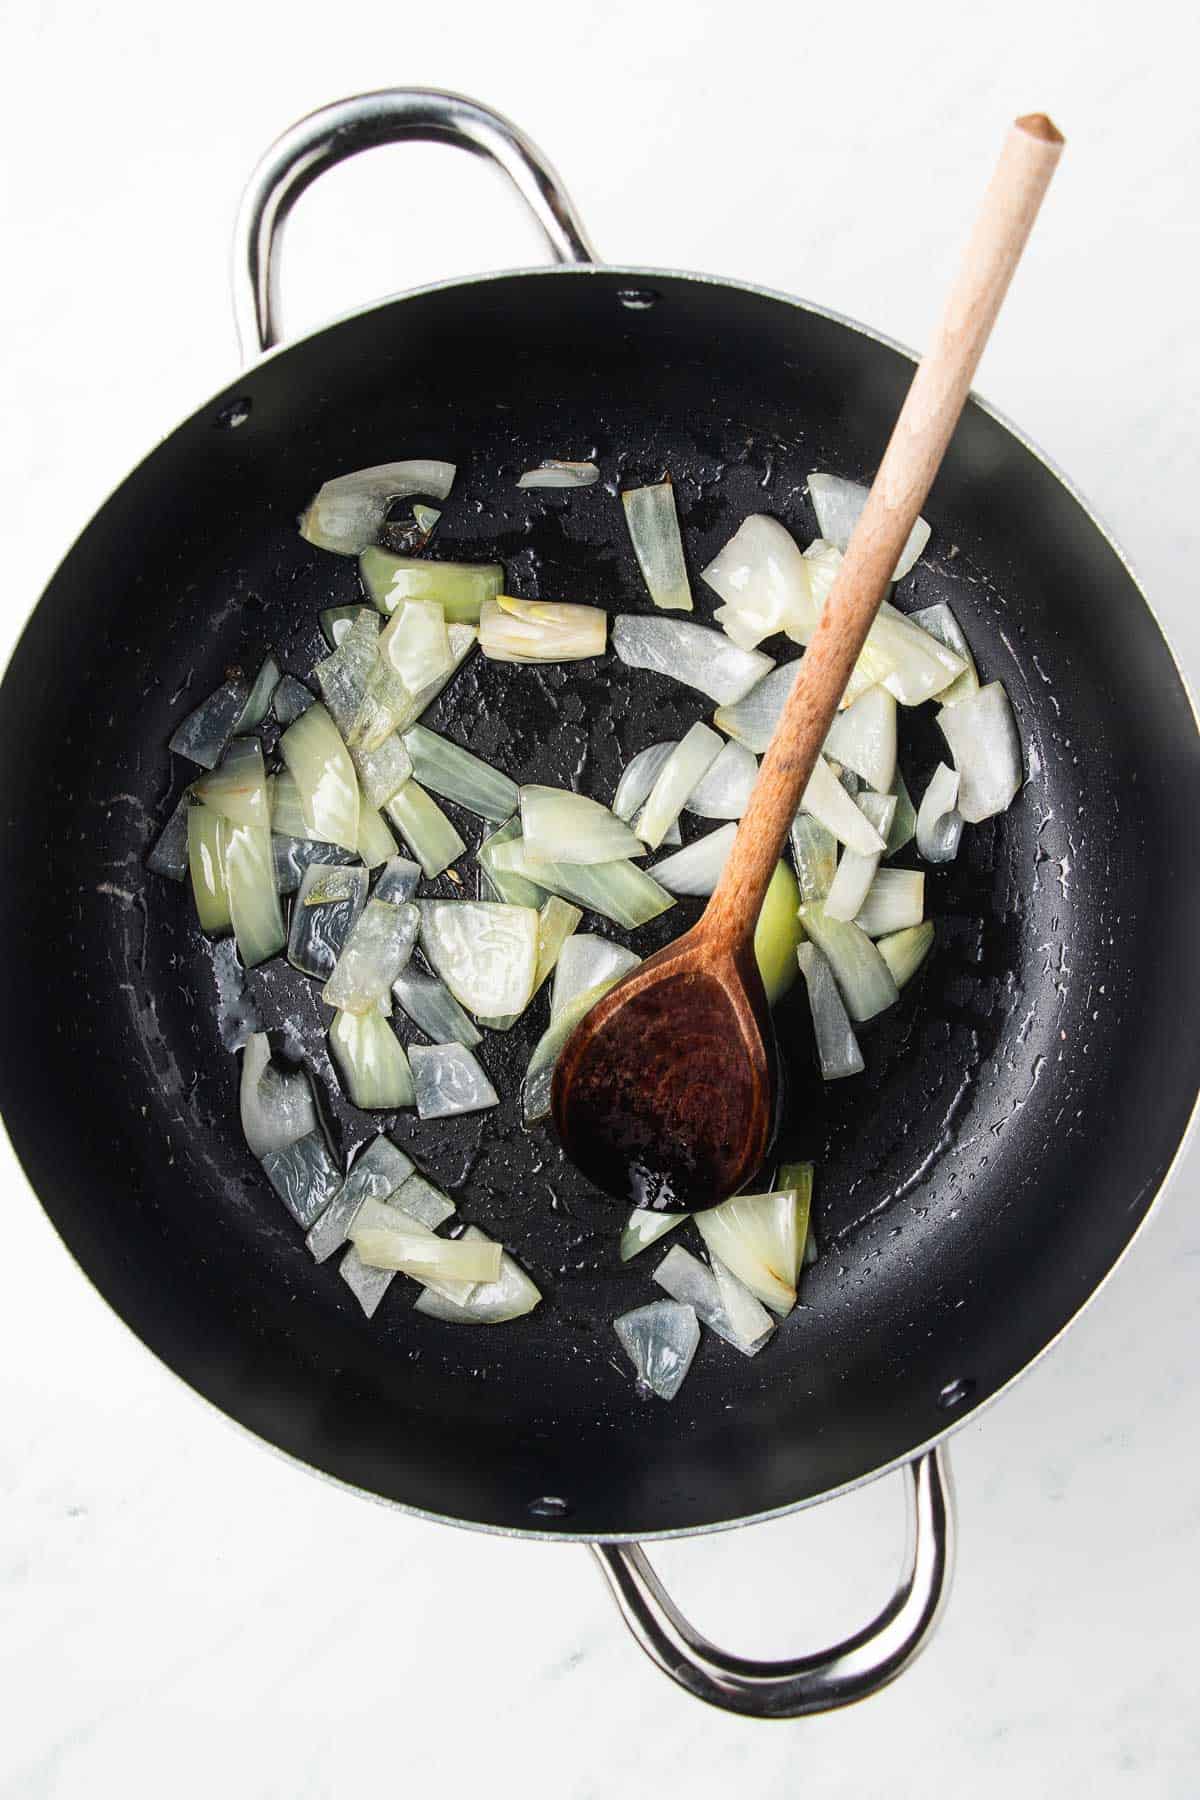 Sautéed onions in a black wok with a wooden spoon.